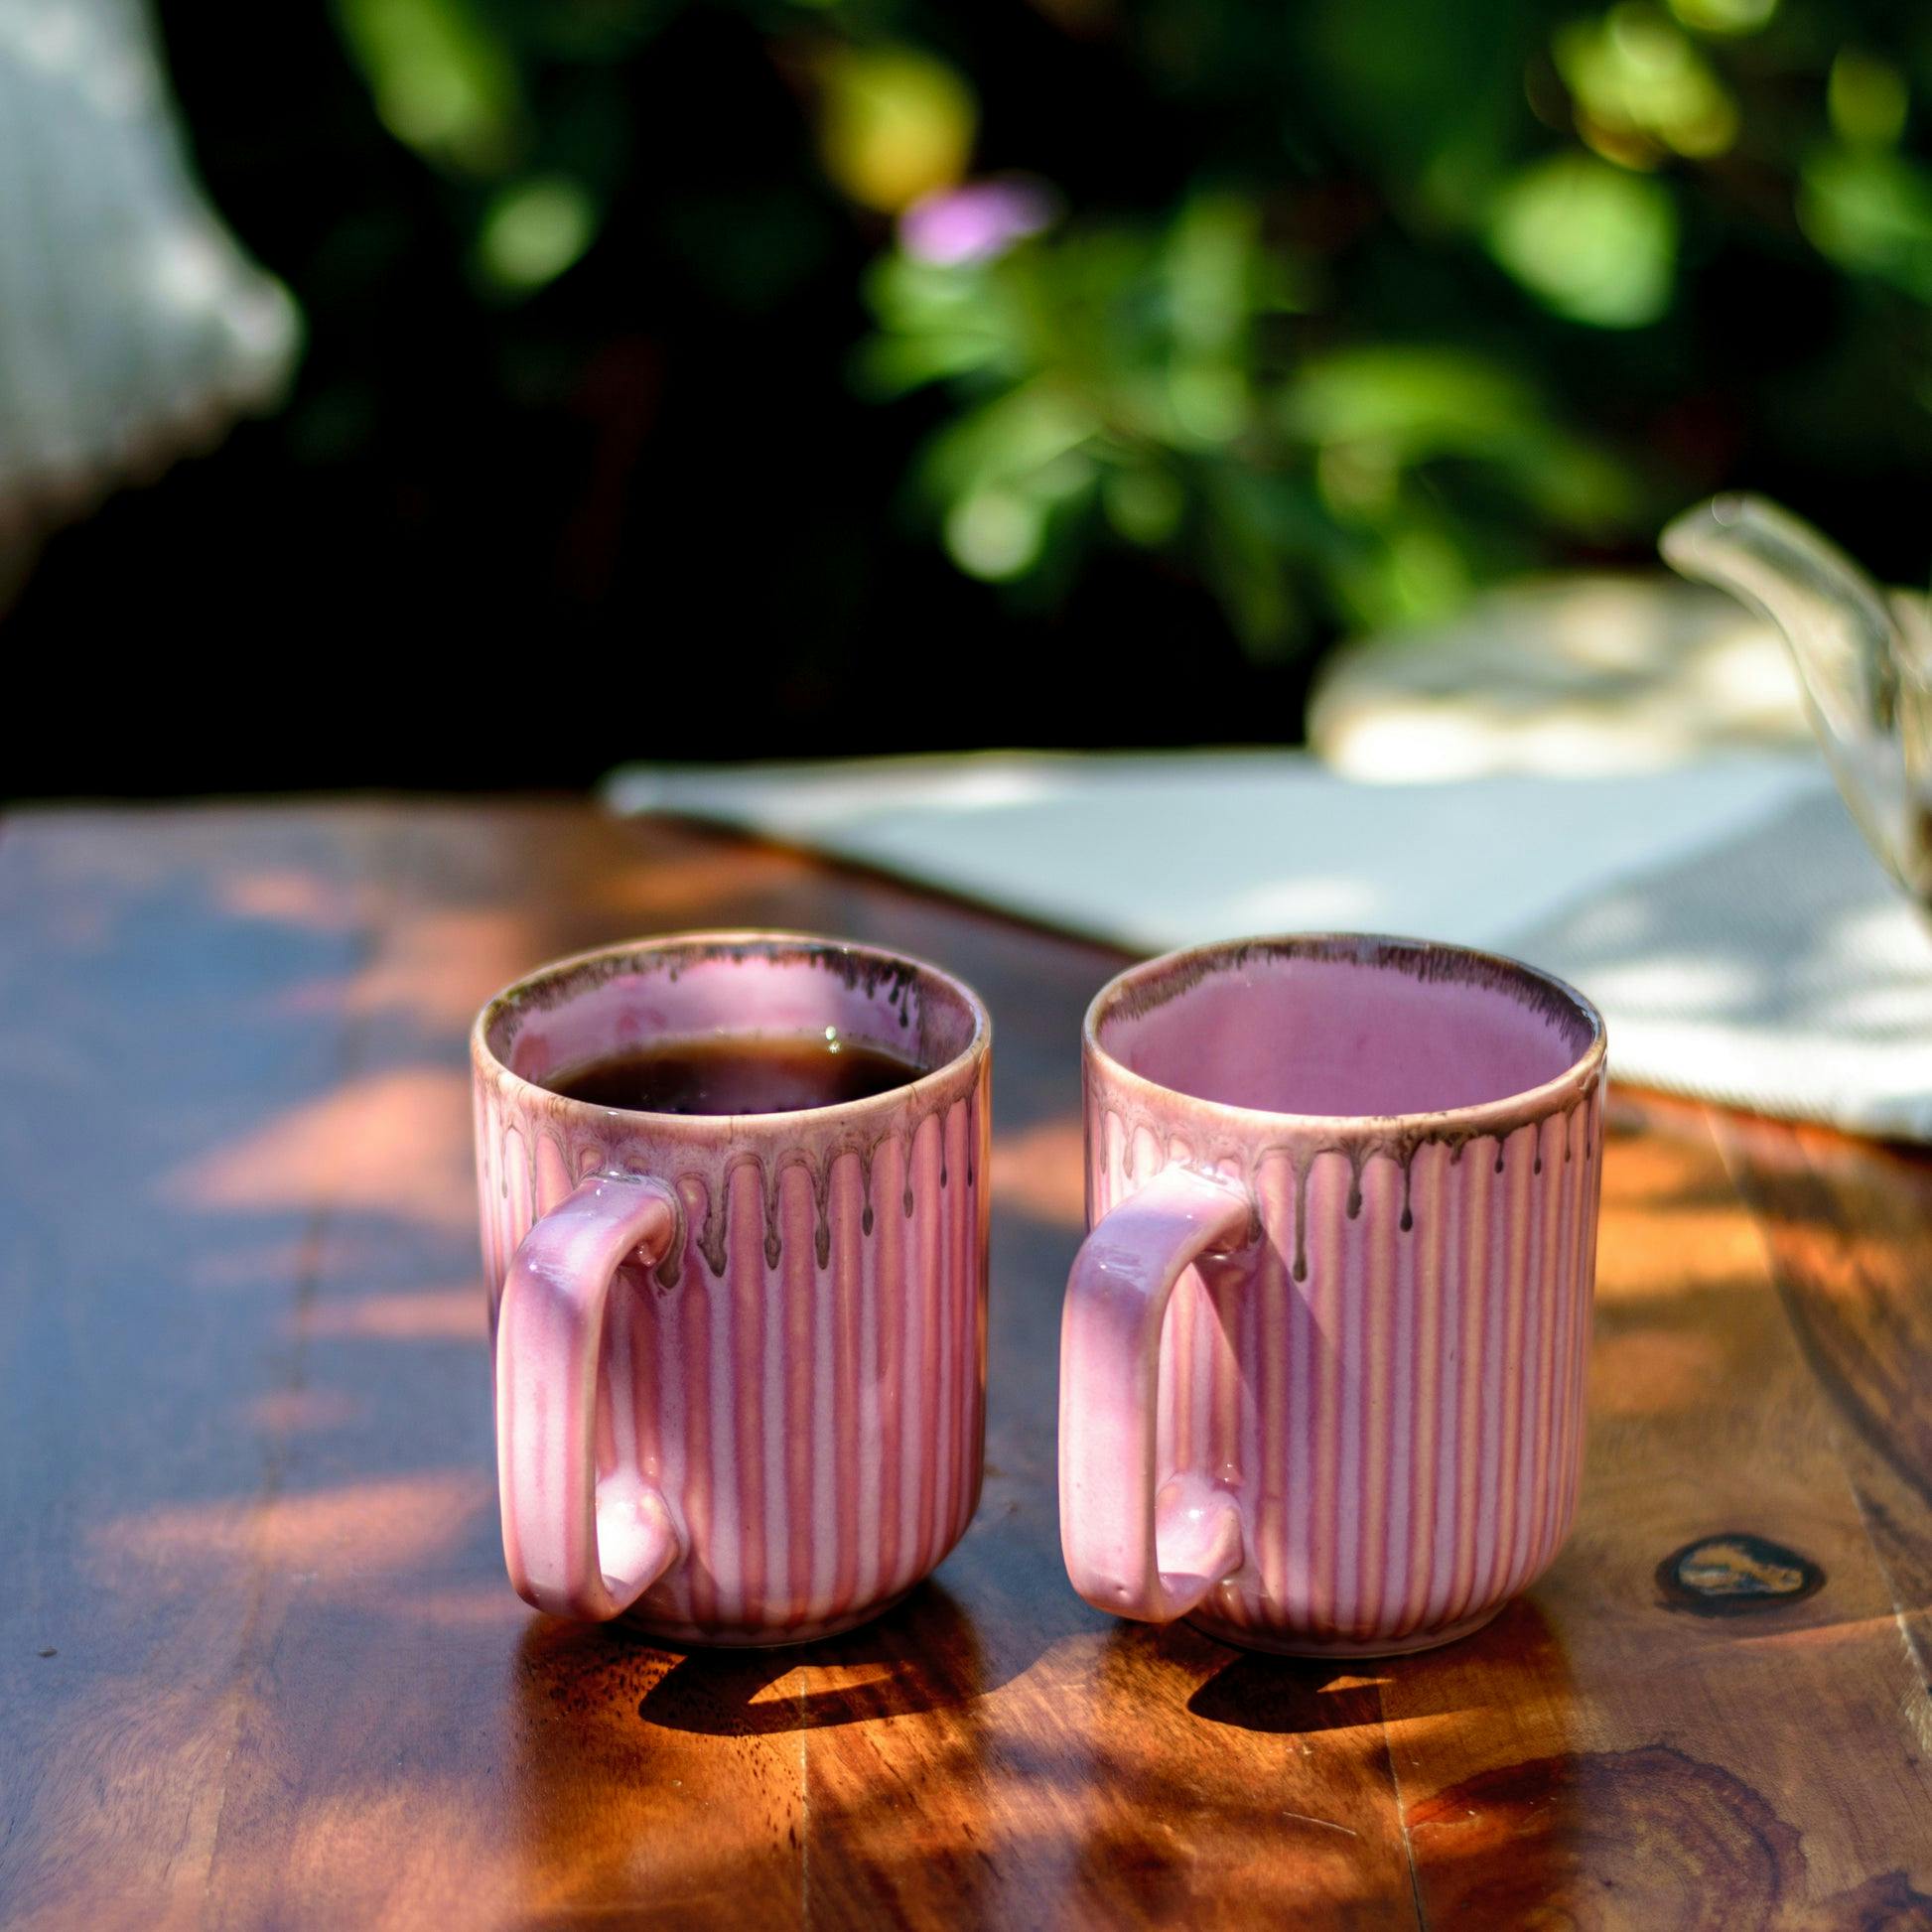 Raysa Tall Mugs Pink - set of 2, a product by Oh Yay project